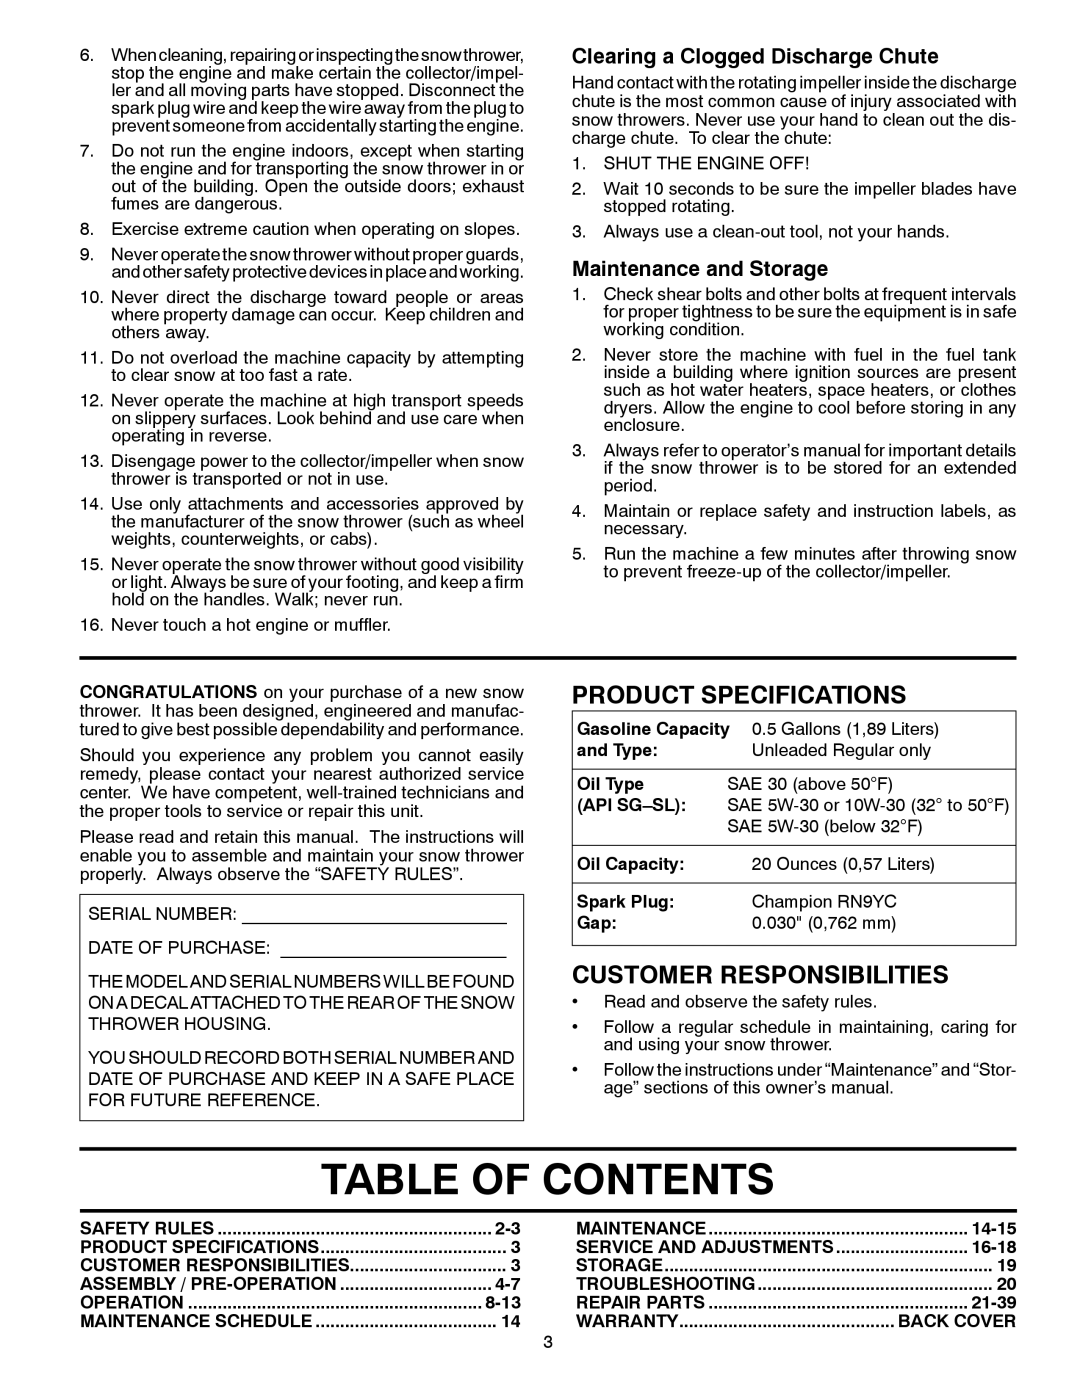 Poulan 96192003201 Table Of Contents, Product Specifications, Customer Responsibilities, Maintenance and Storage, Oil Type 